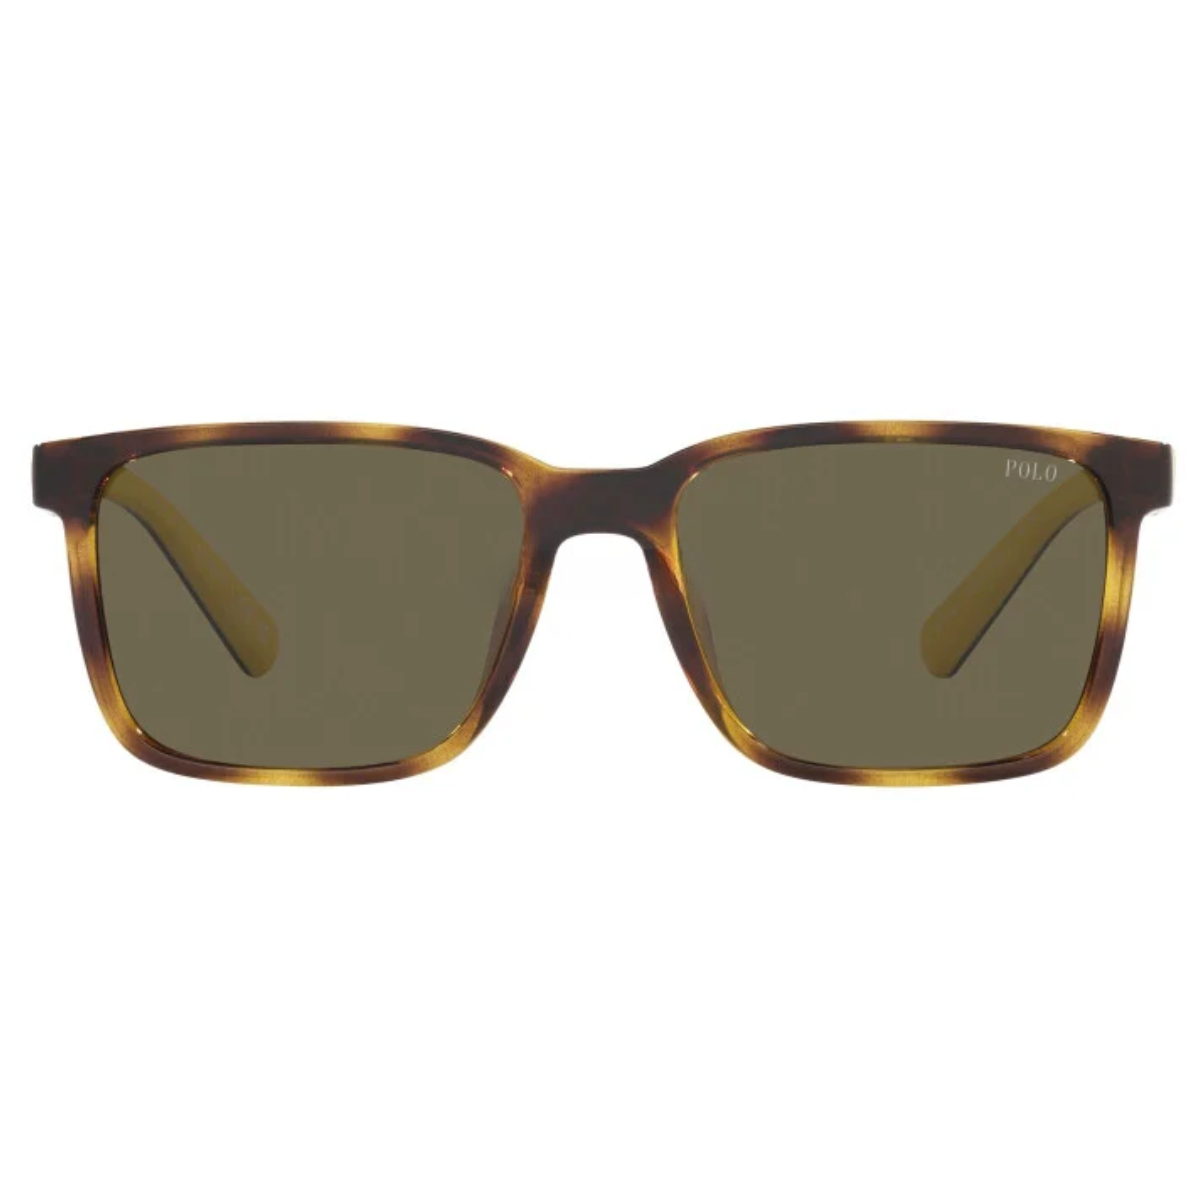 "Shop the Ralph Lauren Polo 4189U Sunglasses for Men at Optorium. Square-shaped, full acetate frame with light yellow and light grey lenses. Non-polarized, black and yellow/red temple colors."